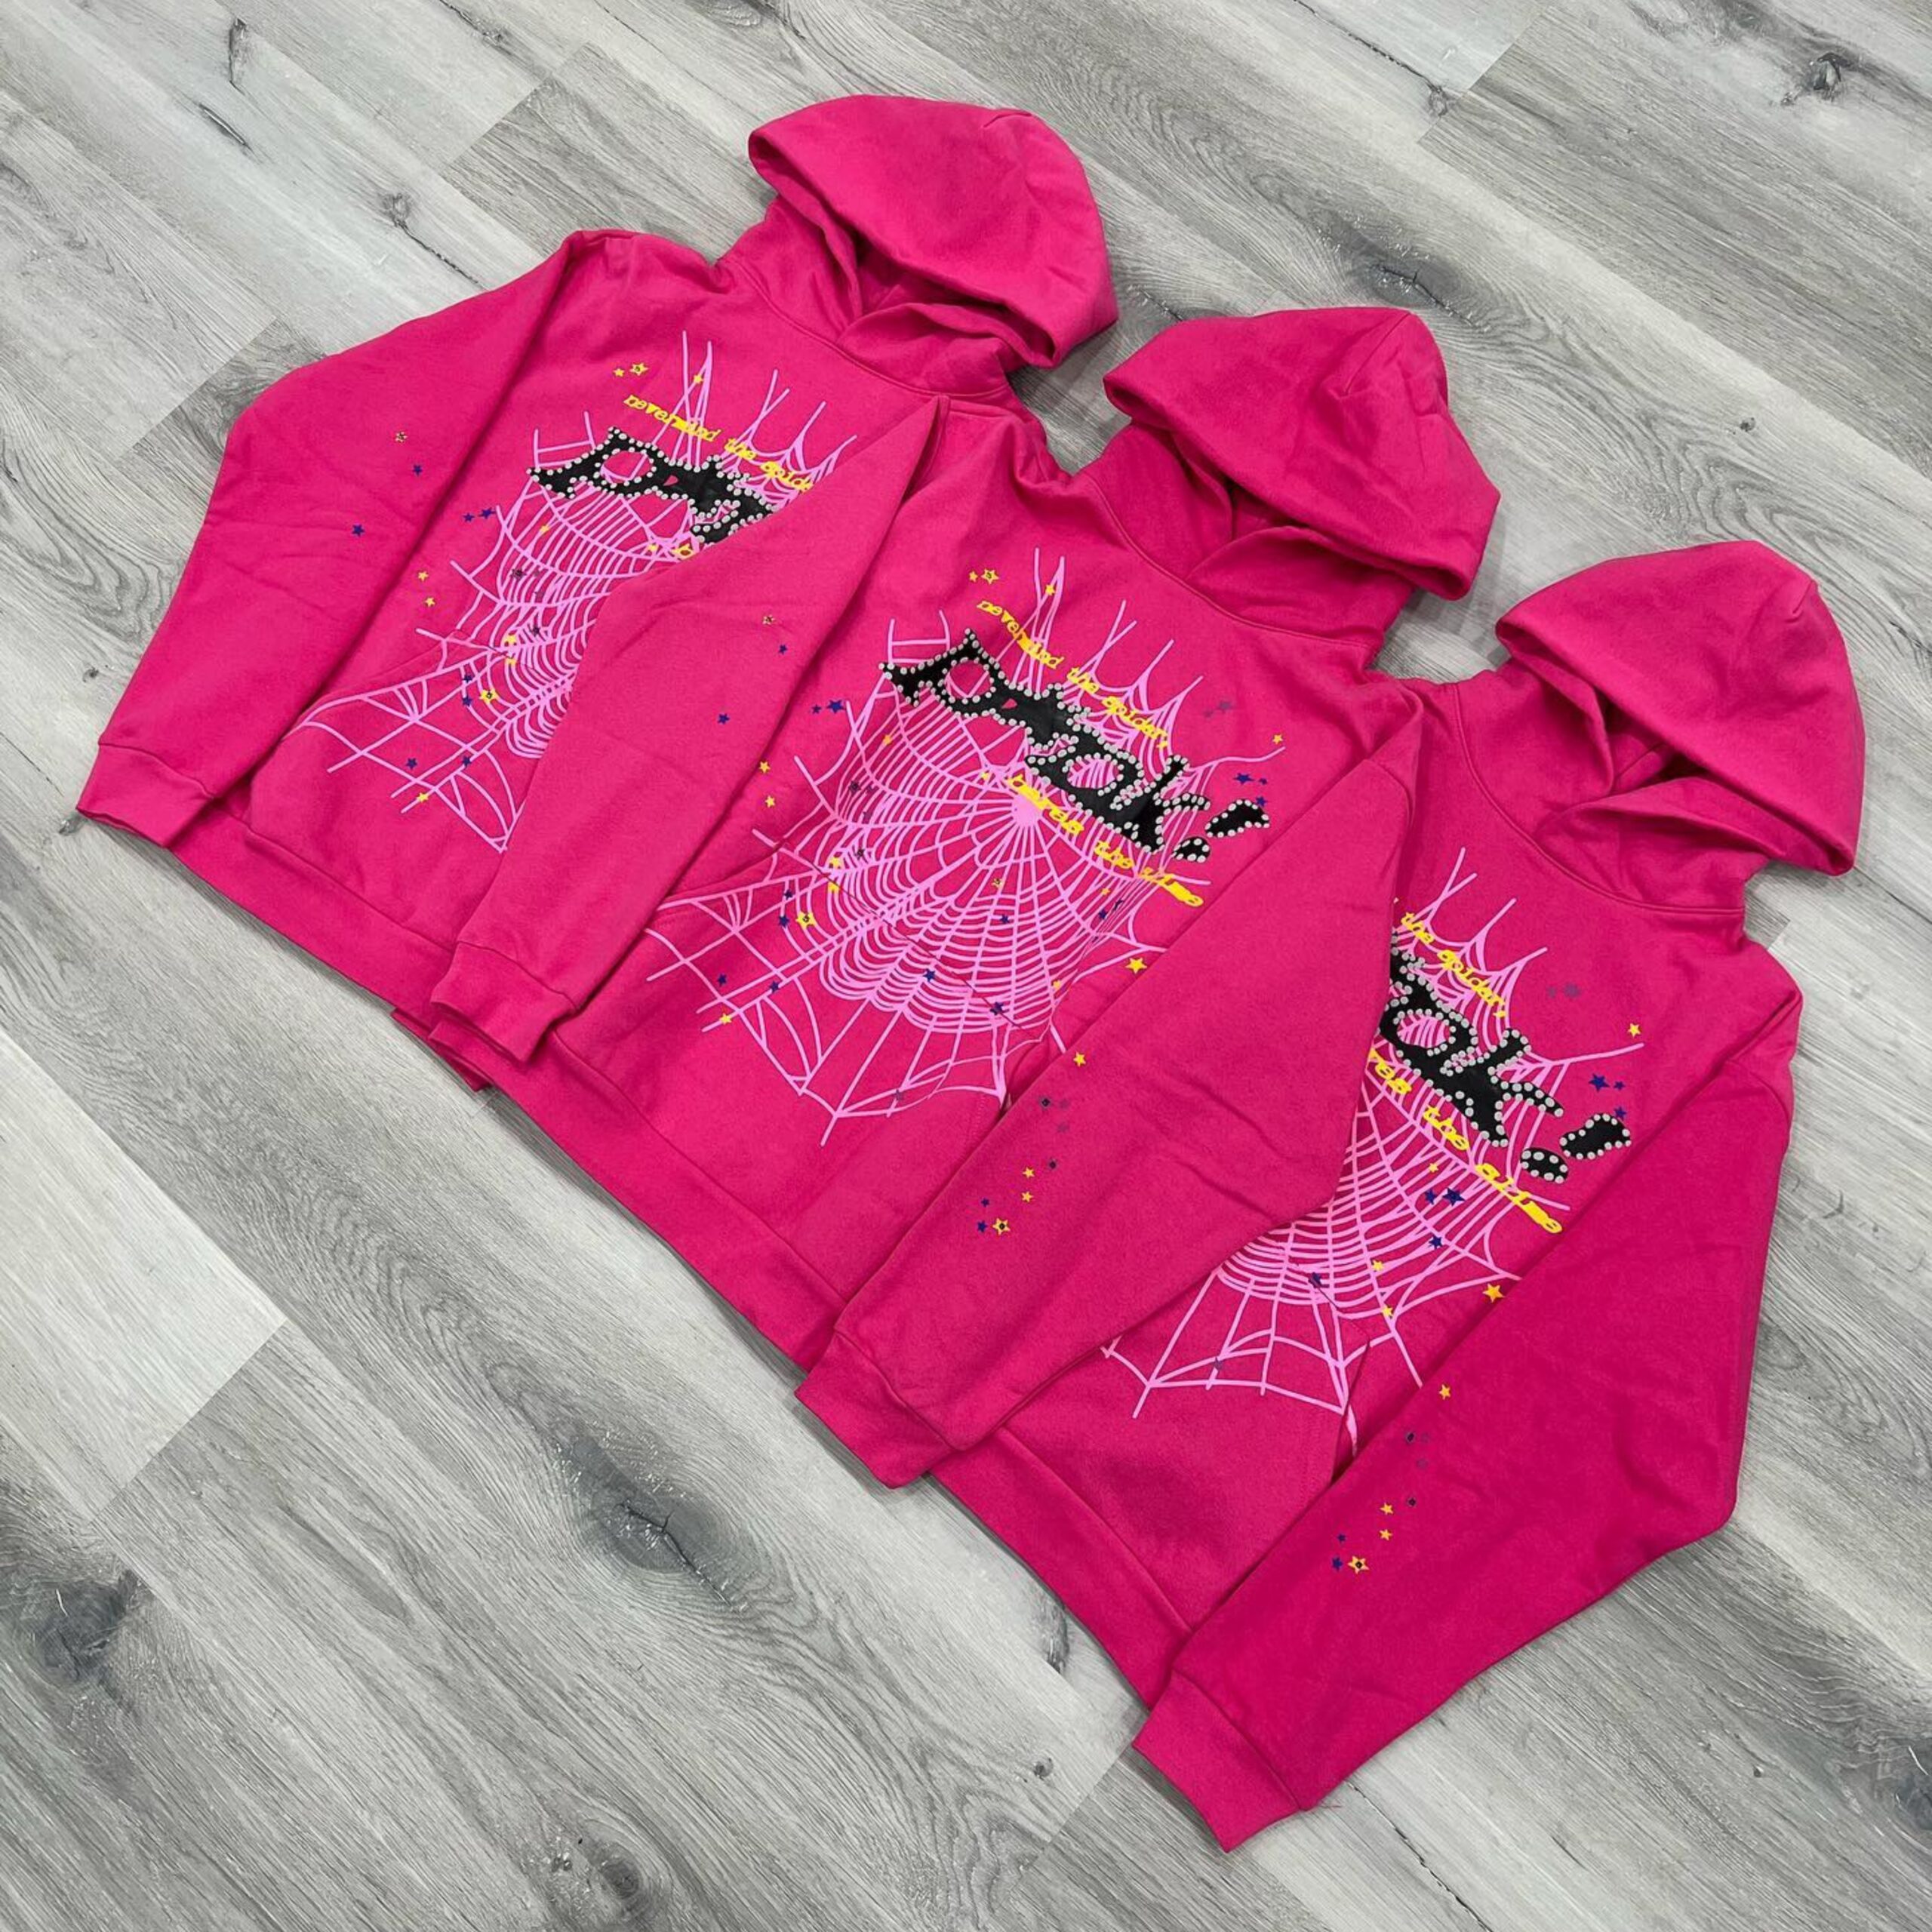 EVERYBODY TAP IN NOW!! NEW SALES ON PINK SPIDER TRACKSUITS🔥🔥🔥